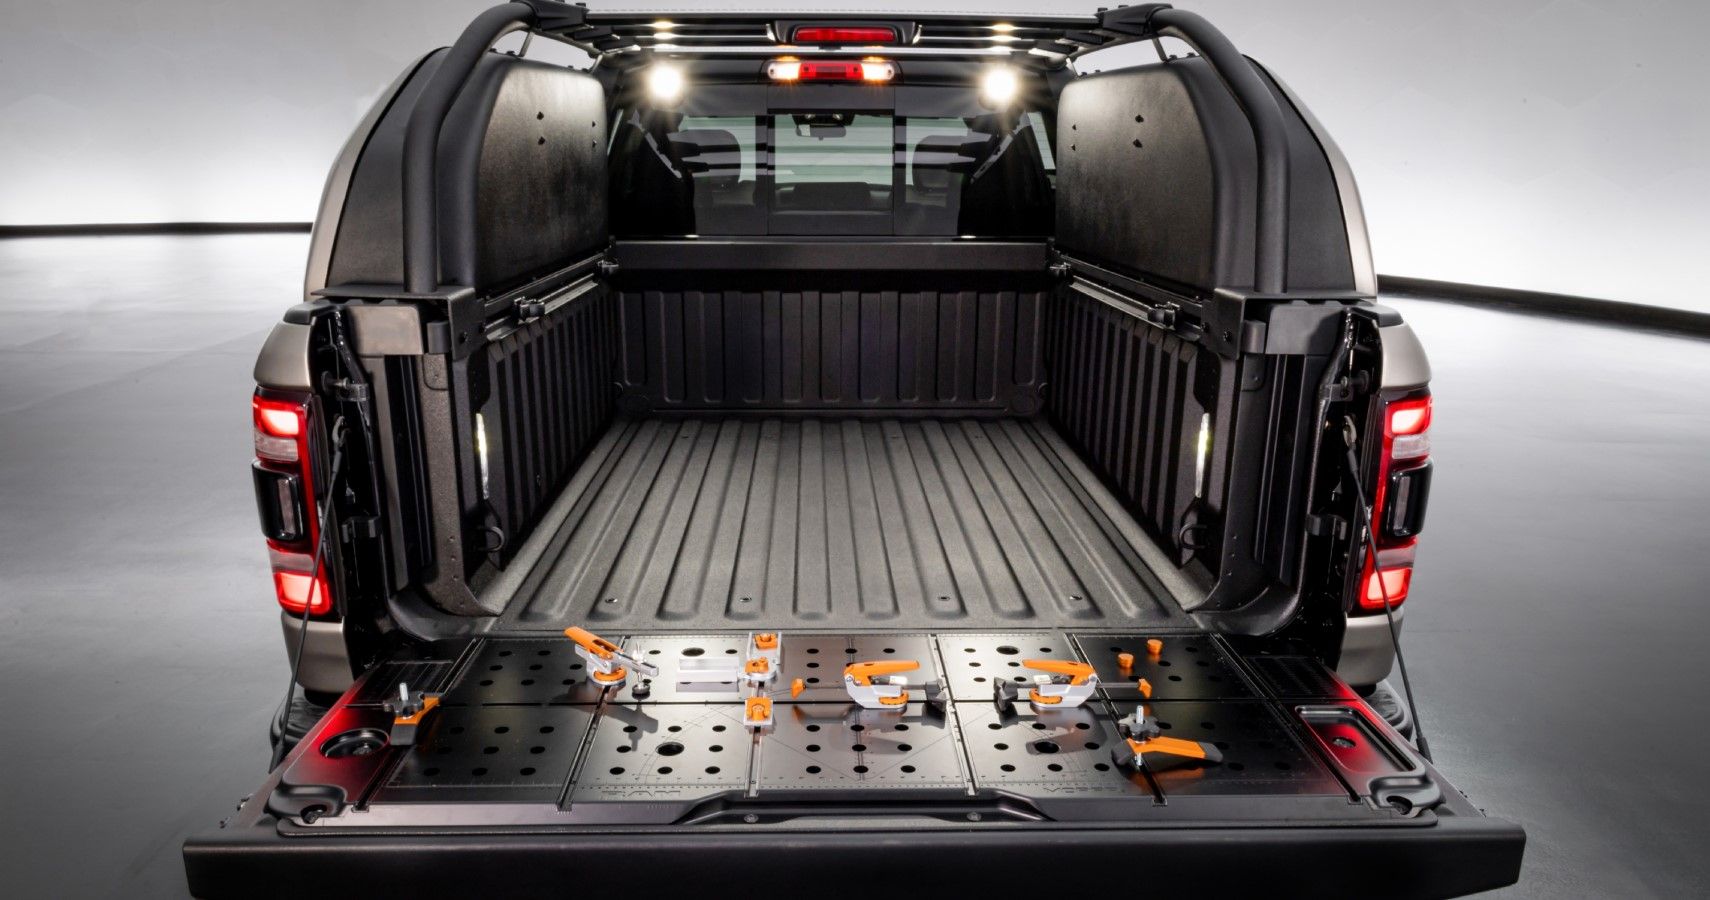 Ram 1500 Backcountry X Concept truck bed view